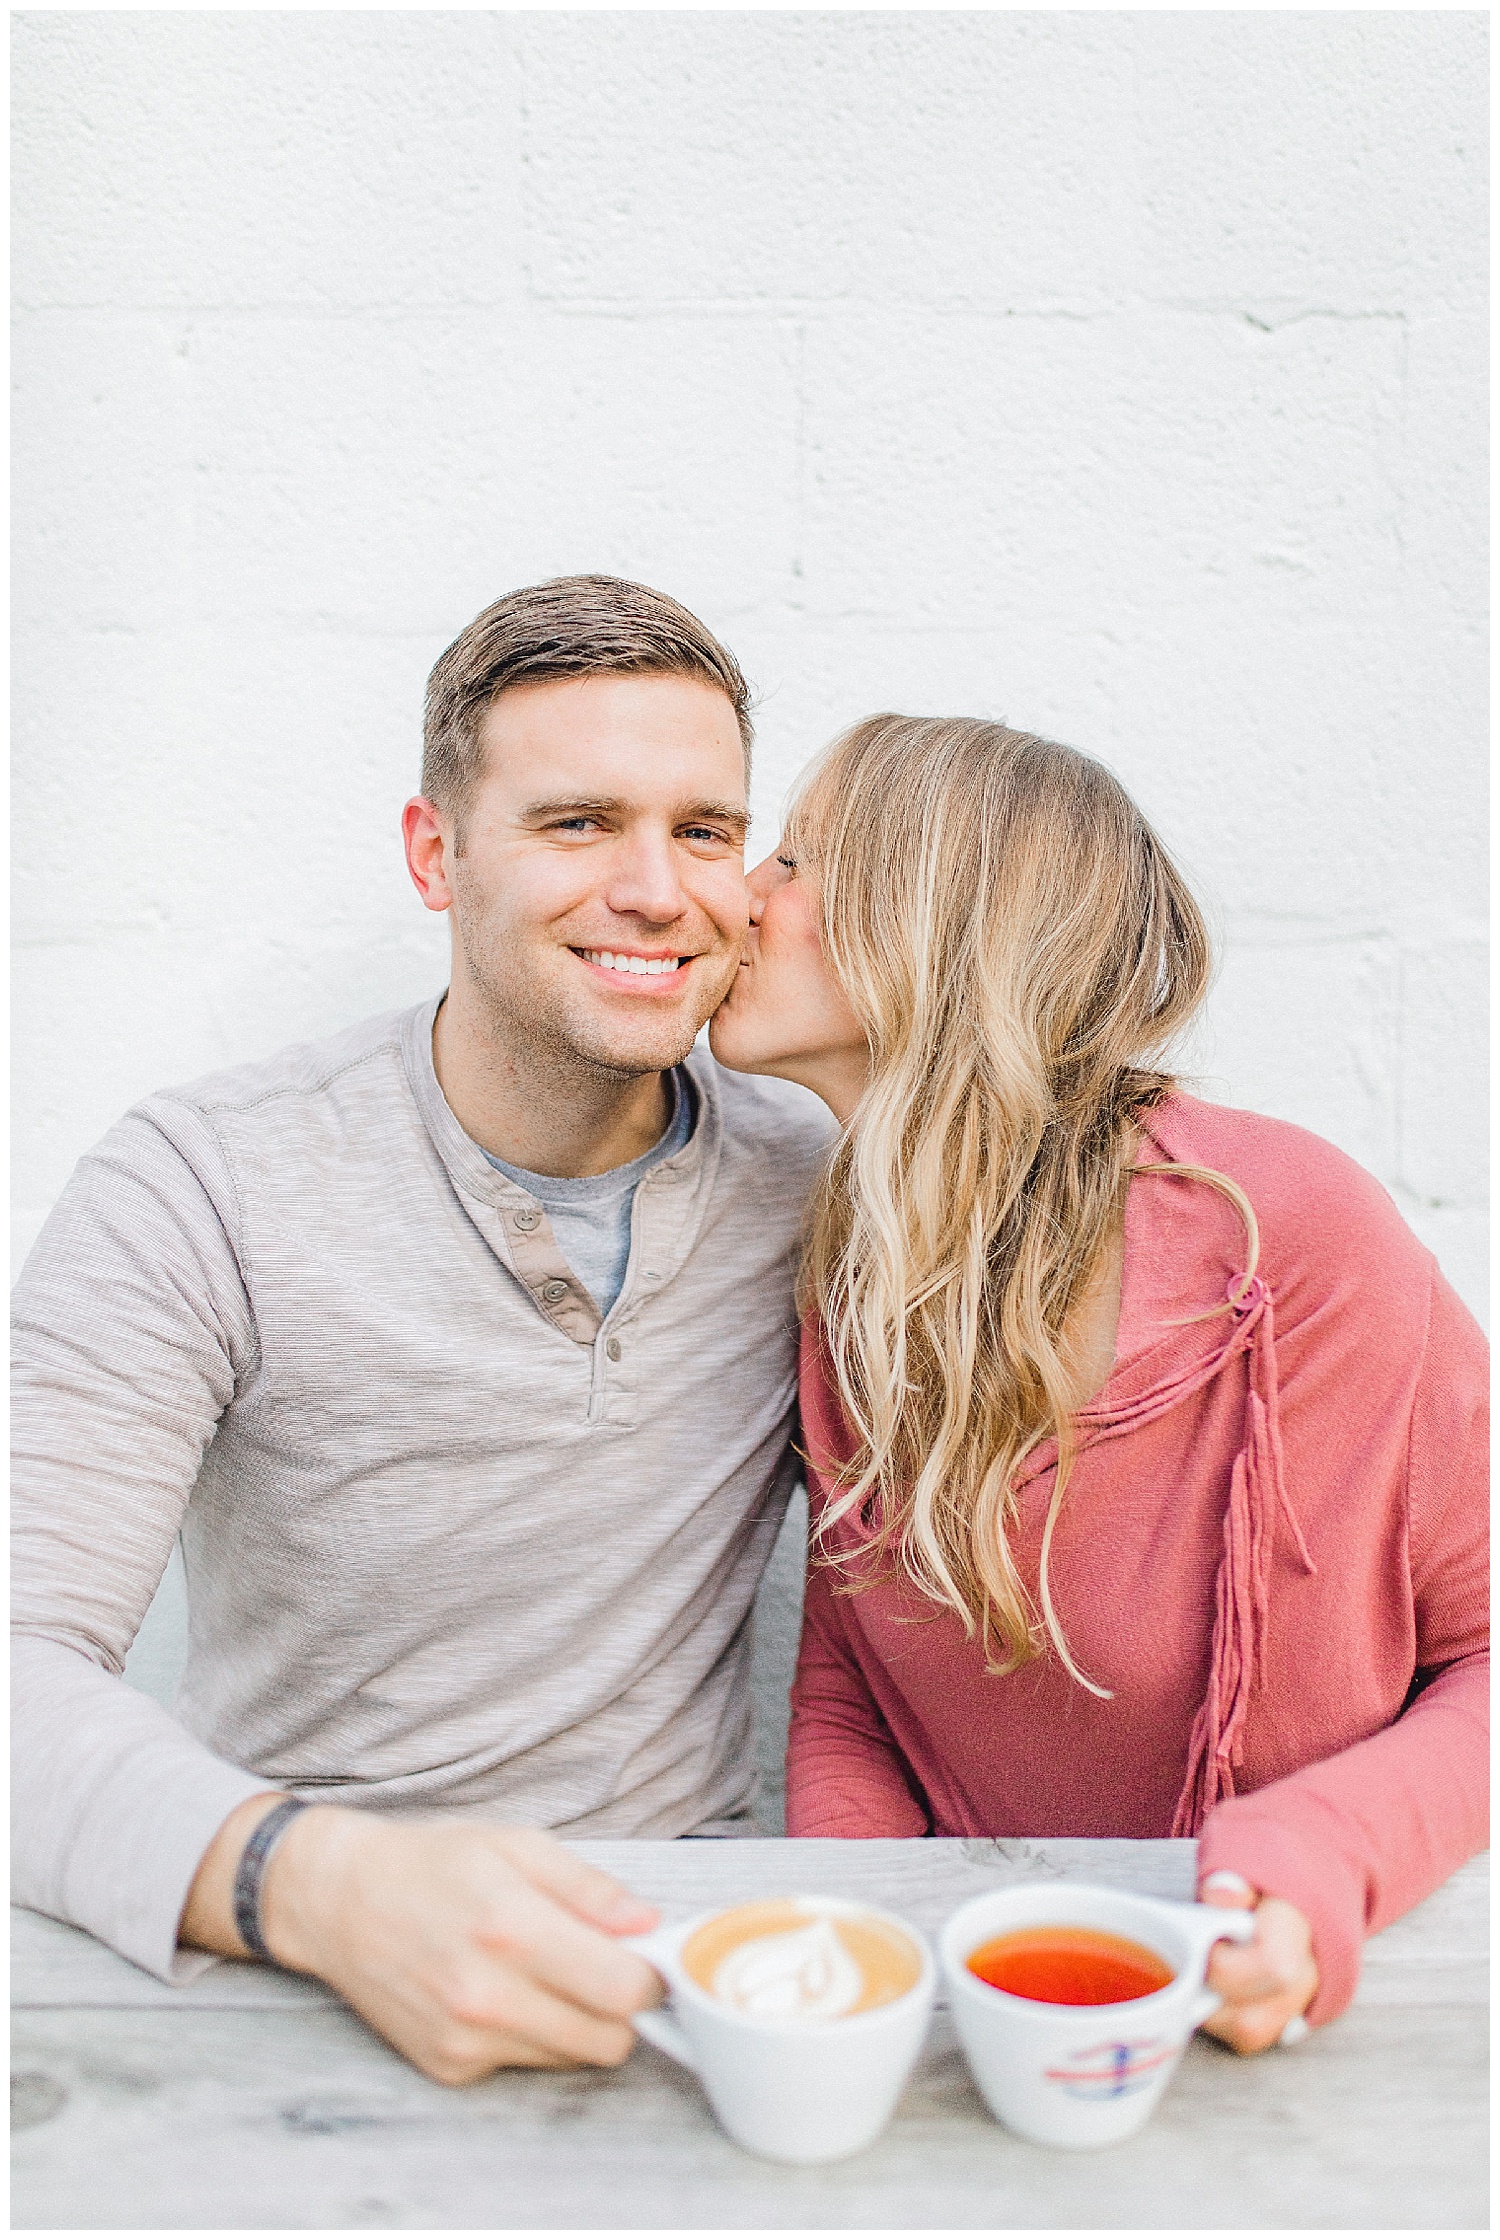 ERC_0905_Downtown Nashville Engagement Session at Barista Parlor | Emma Rose Company Wedding Photographer | Outfit Inspiration for Engagement Session | Kindred Light and Airy Photographer.jpg